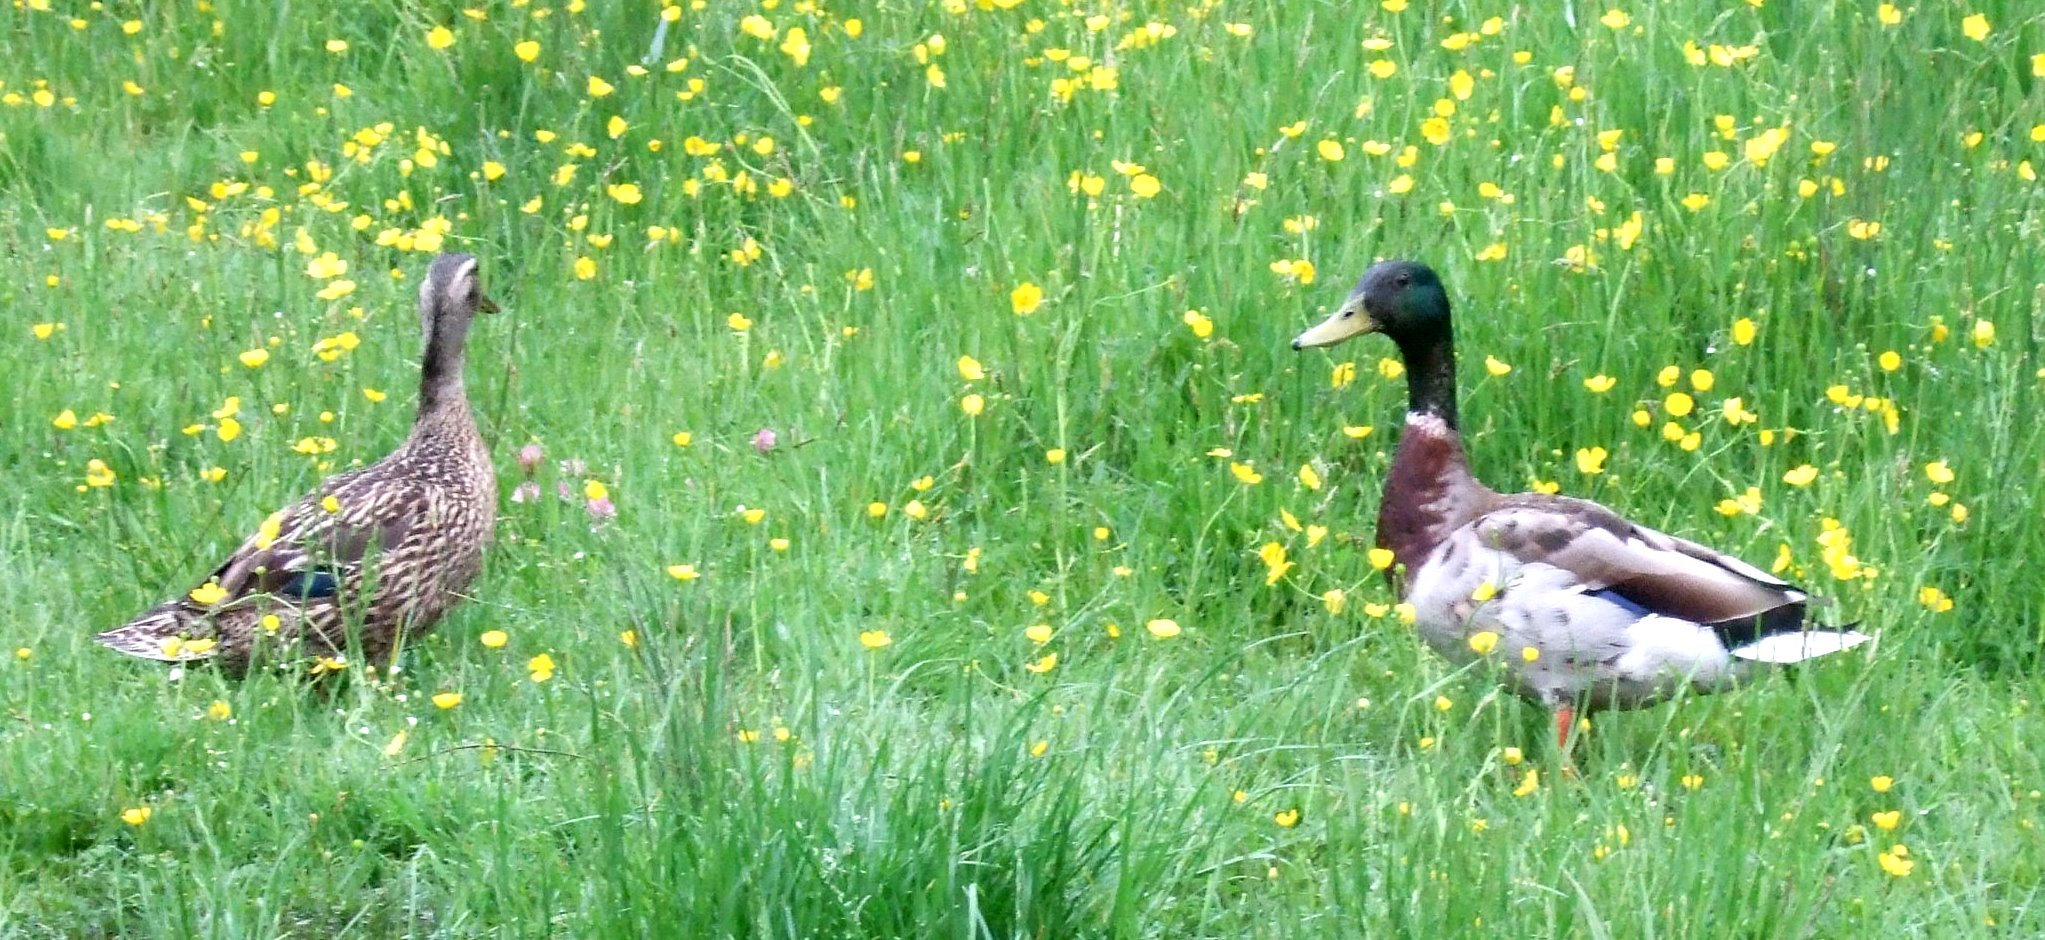 two ducks standing in tall grass with yellow flowers